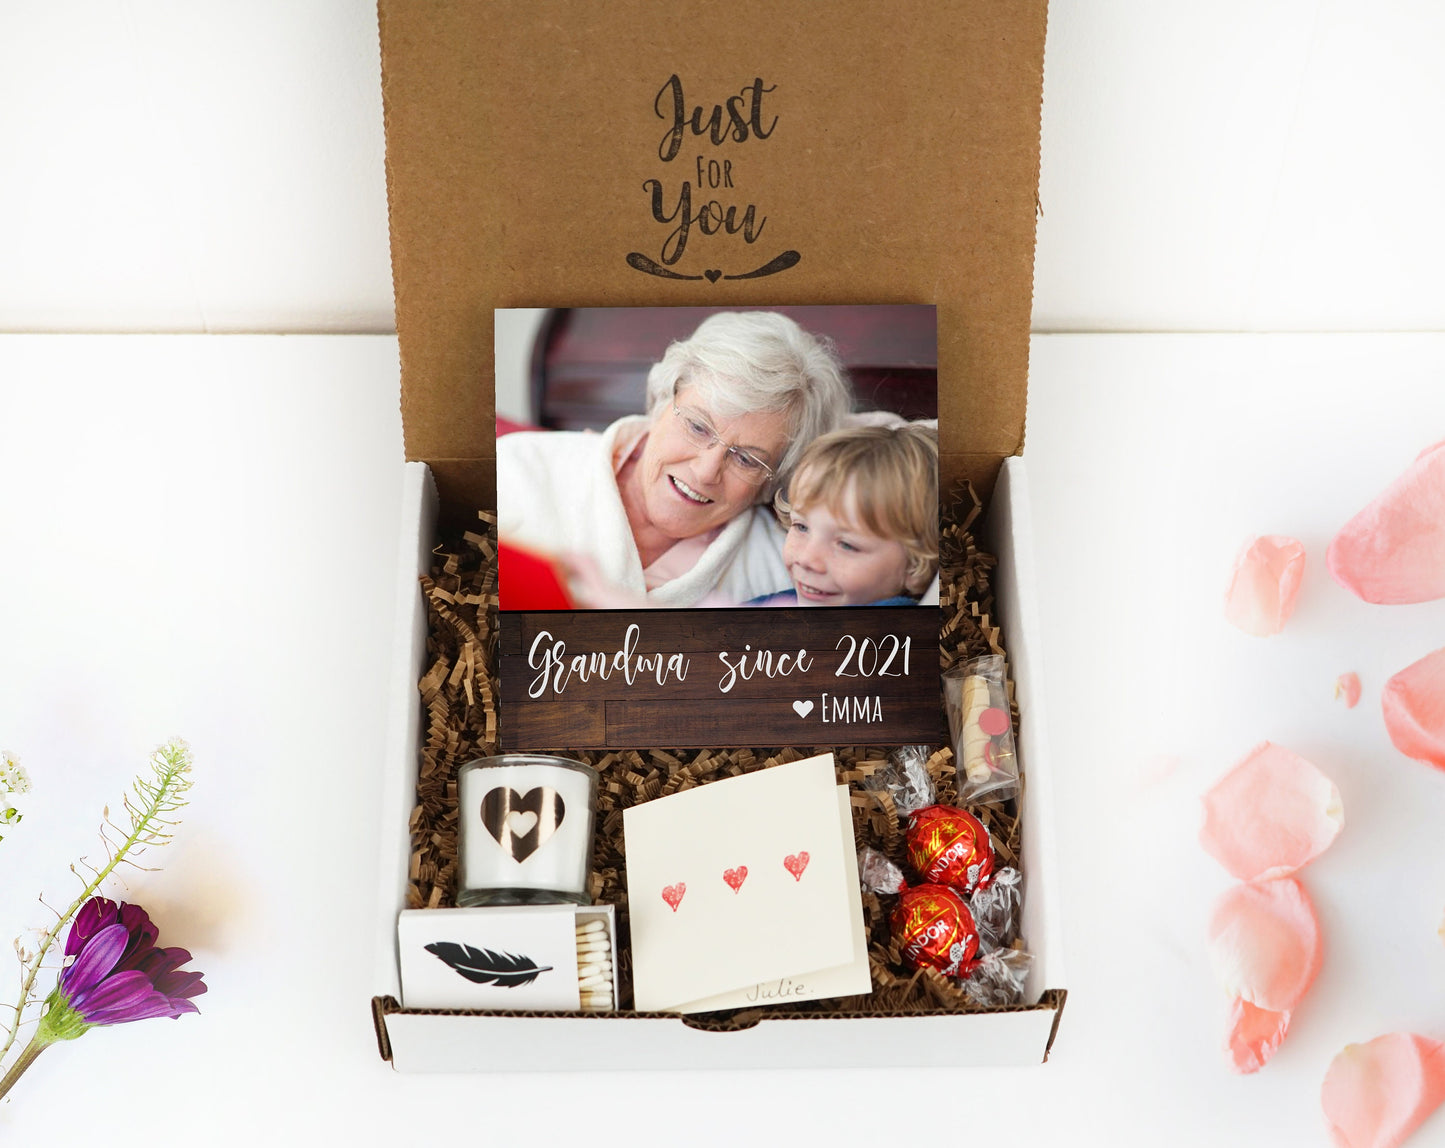 Mother's Day Gift for Grandma - 4" or 6" Personalized Photo Block - Grandma Gift Box - Personalized Mother's Day Gift Frame - Grandma Frame